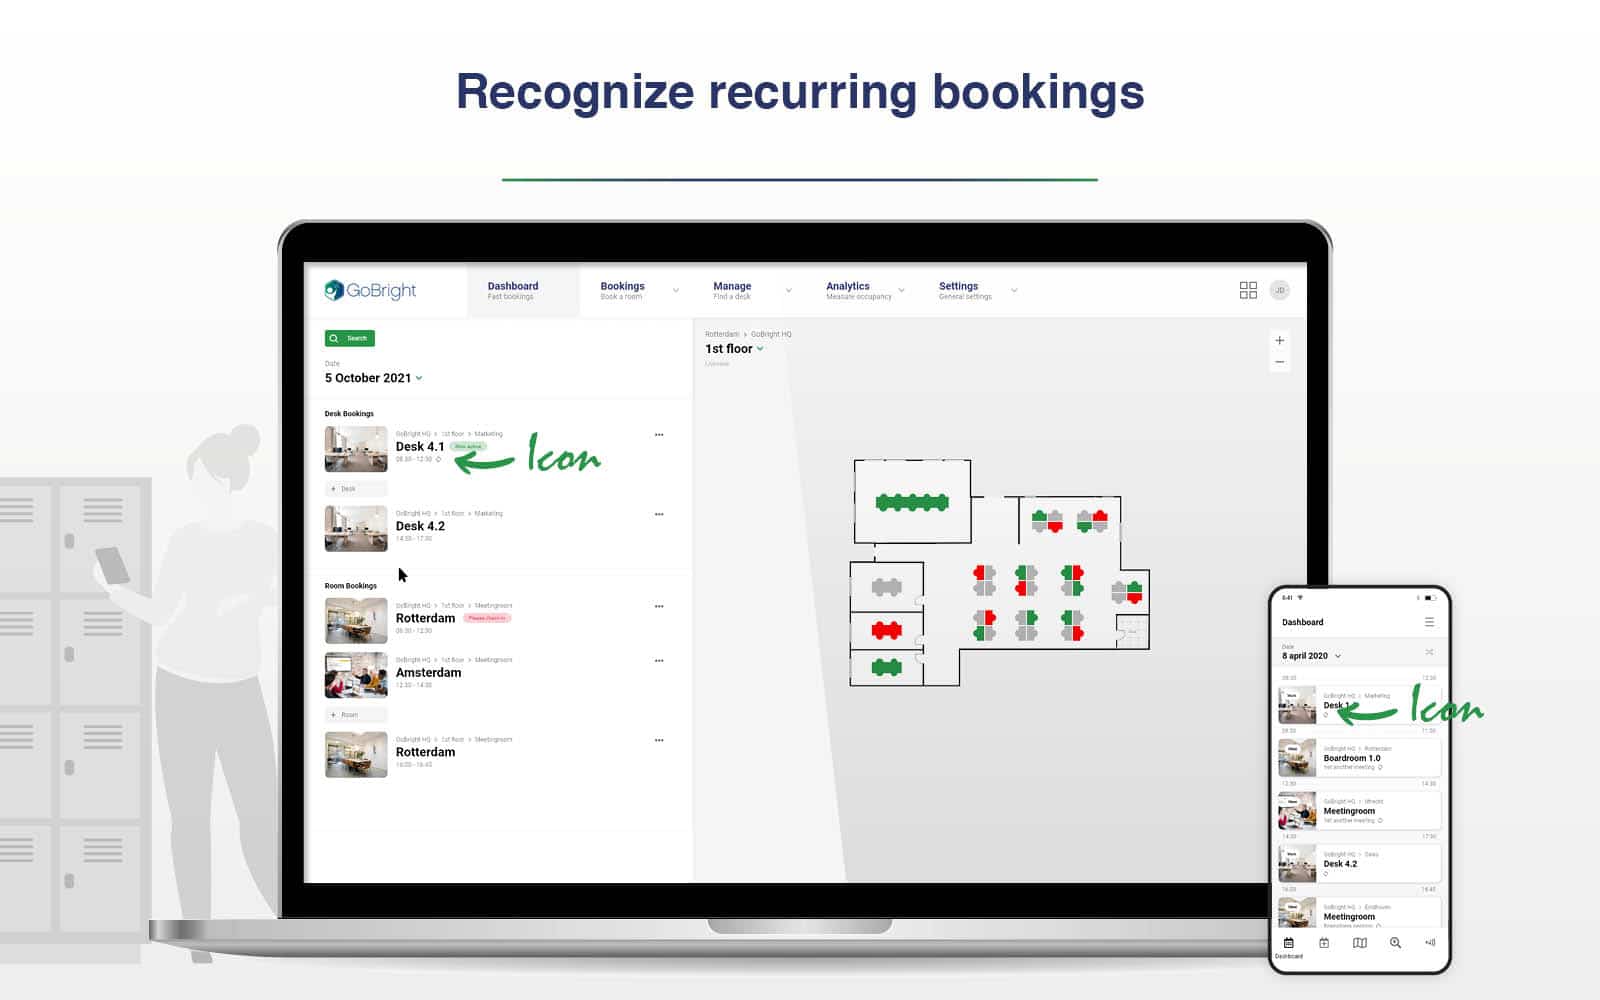 Recurring desk booking - recognize recurring bookings